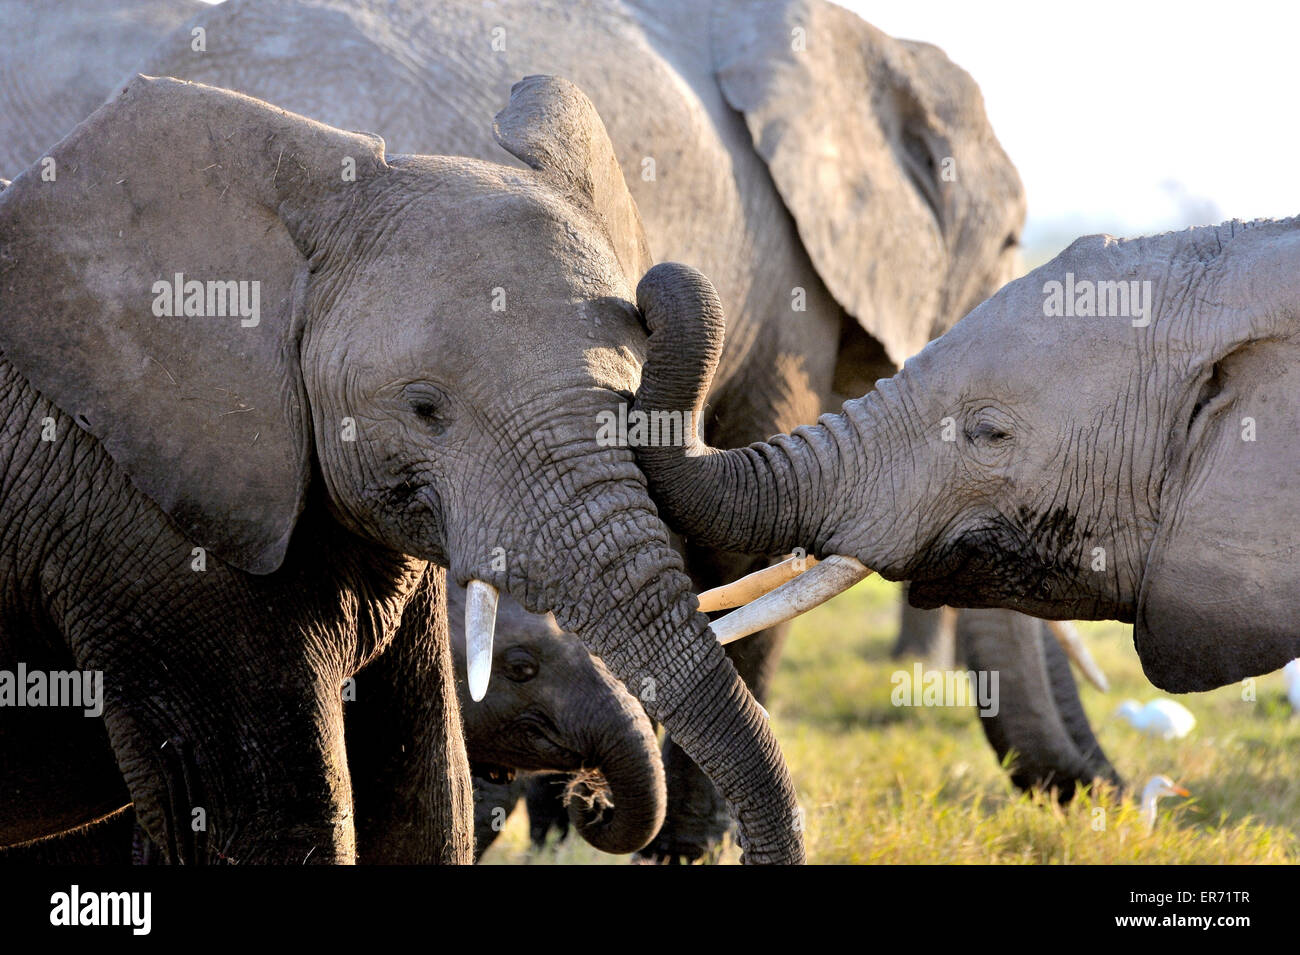 Two young elephants playing with their trunks Stock Photo